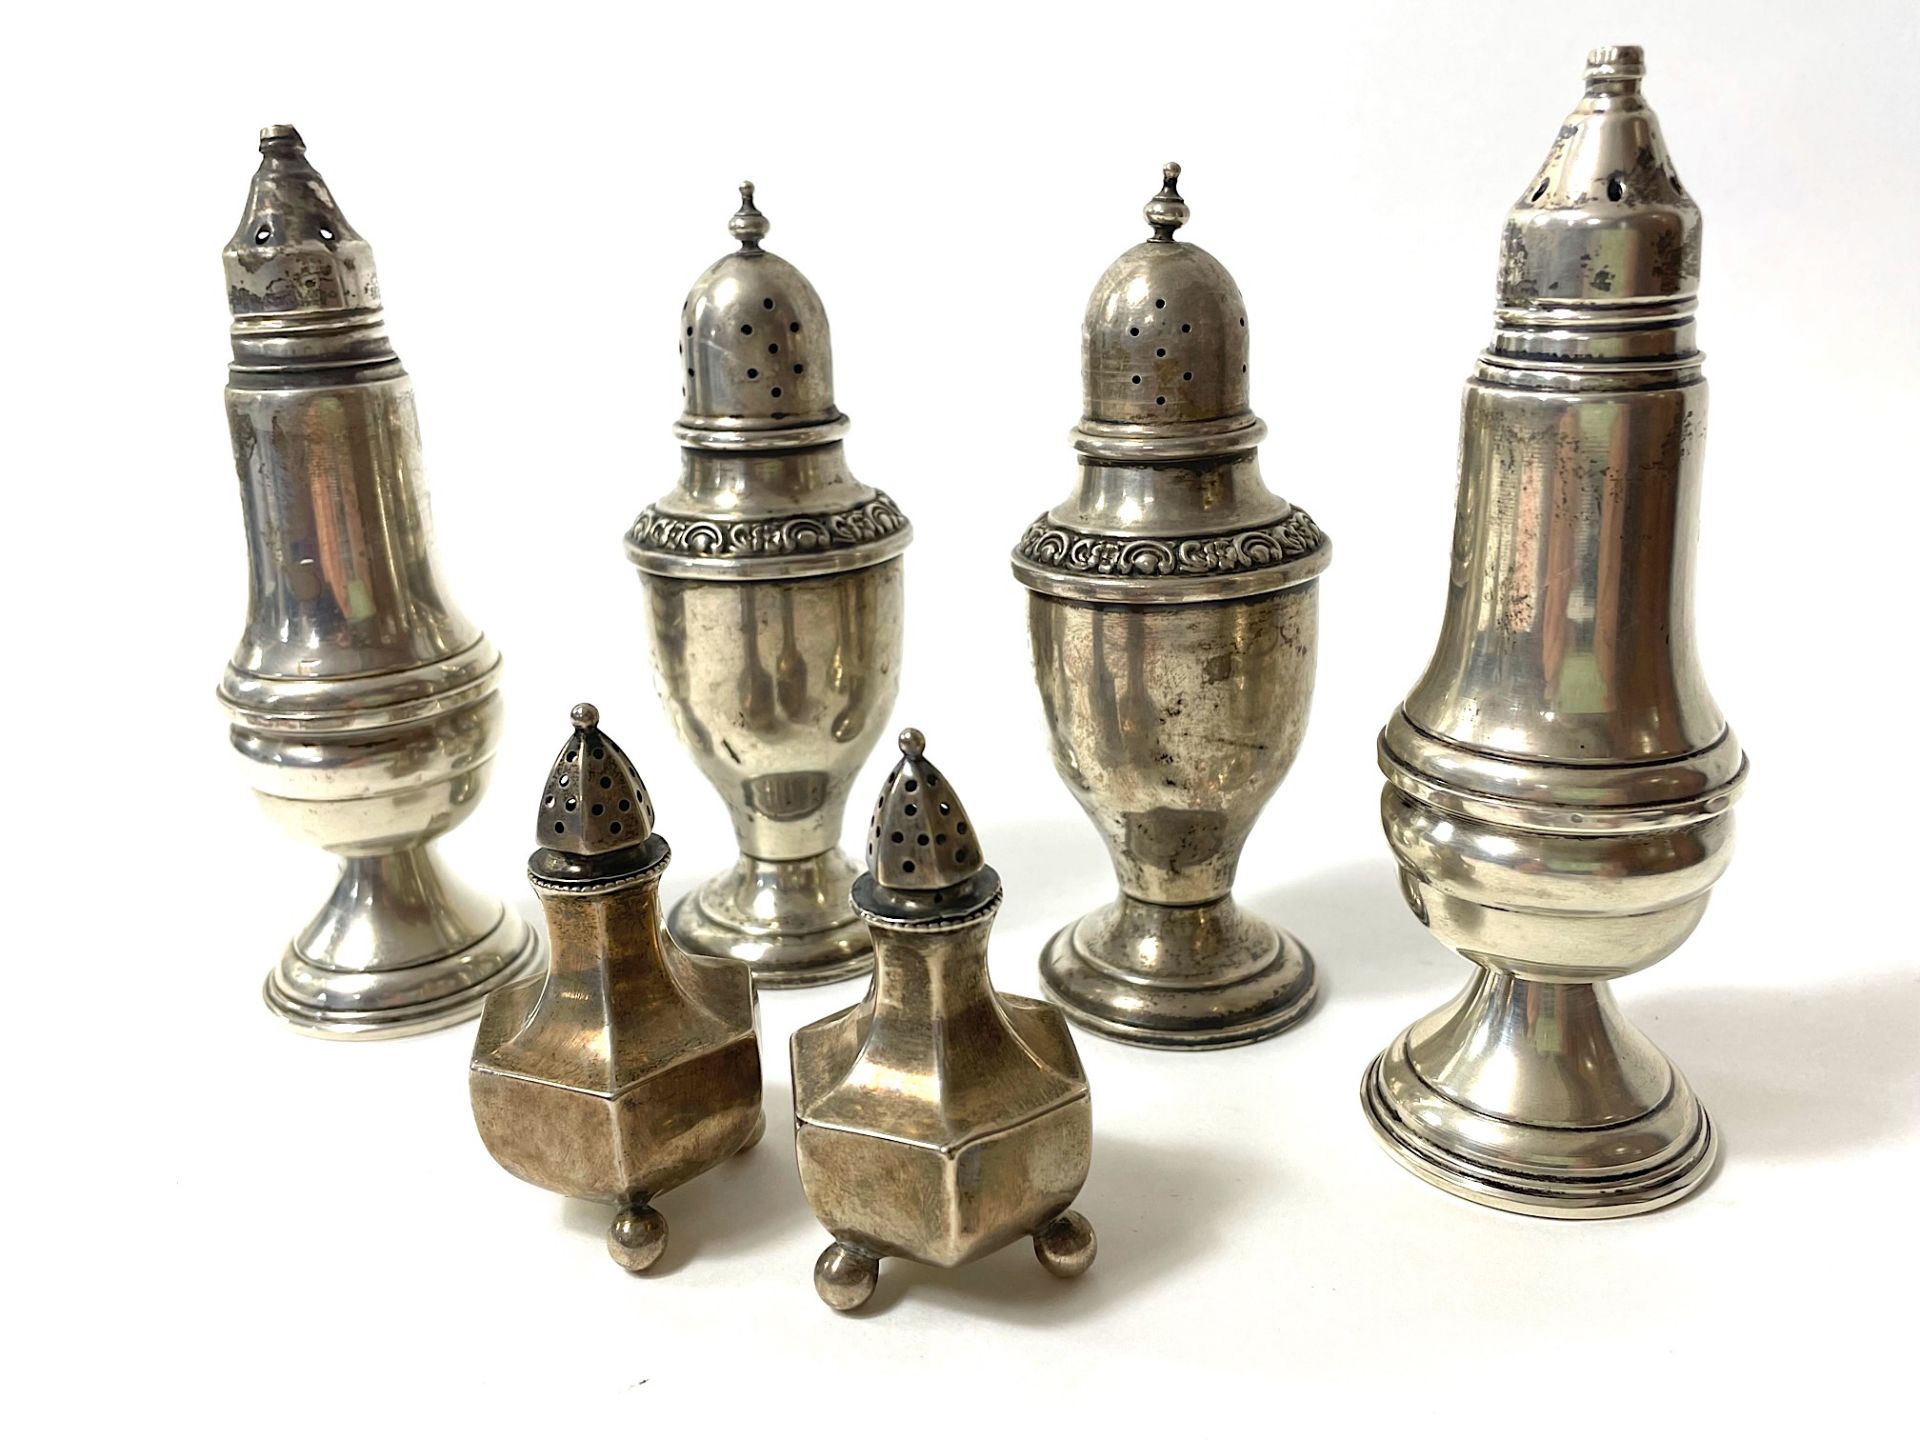 40 pairs of salt/pepper and spice shakers, - Image 43 of 88